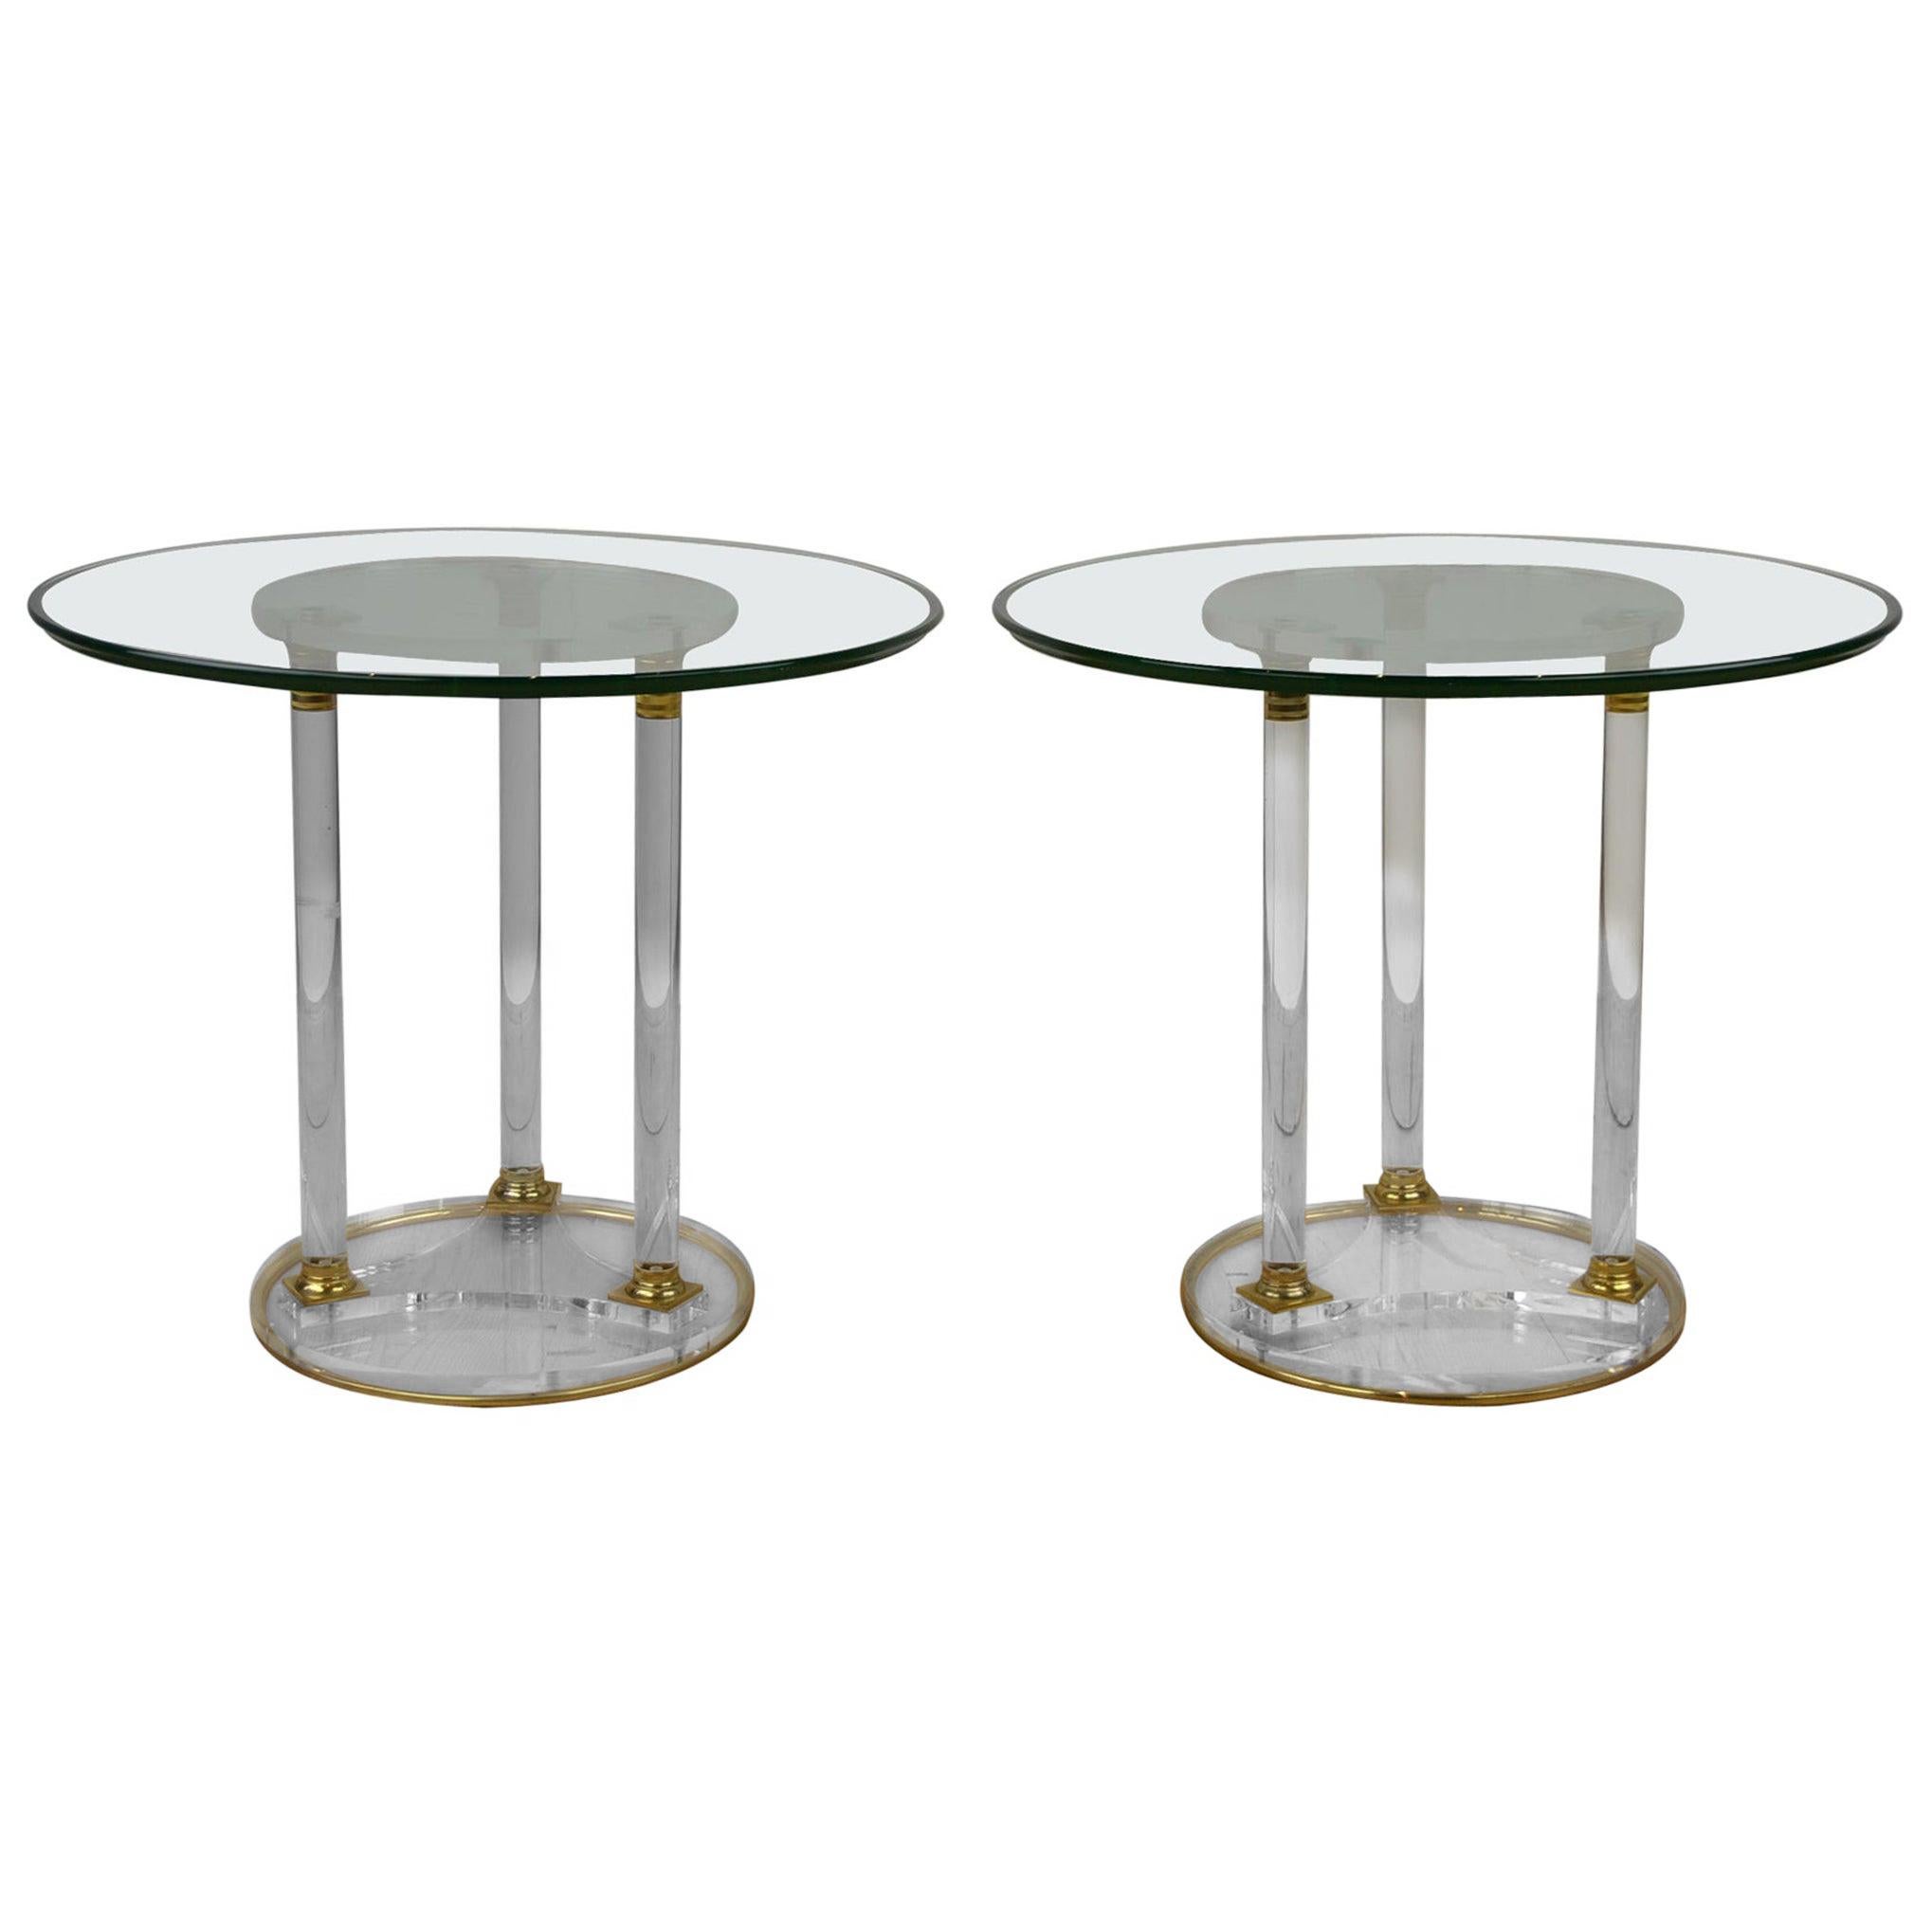 Pair of Round Lucite Side Tables, French Modern Design Tables , 1970s